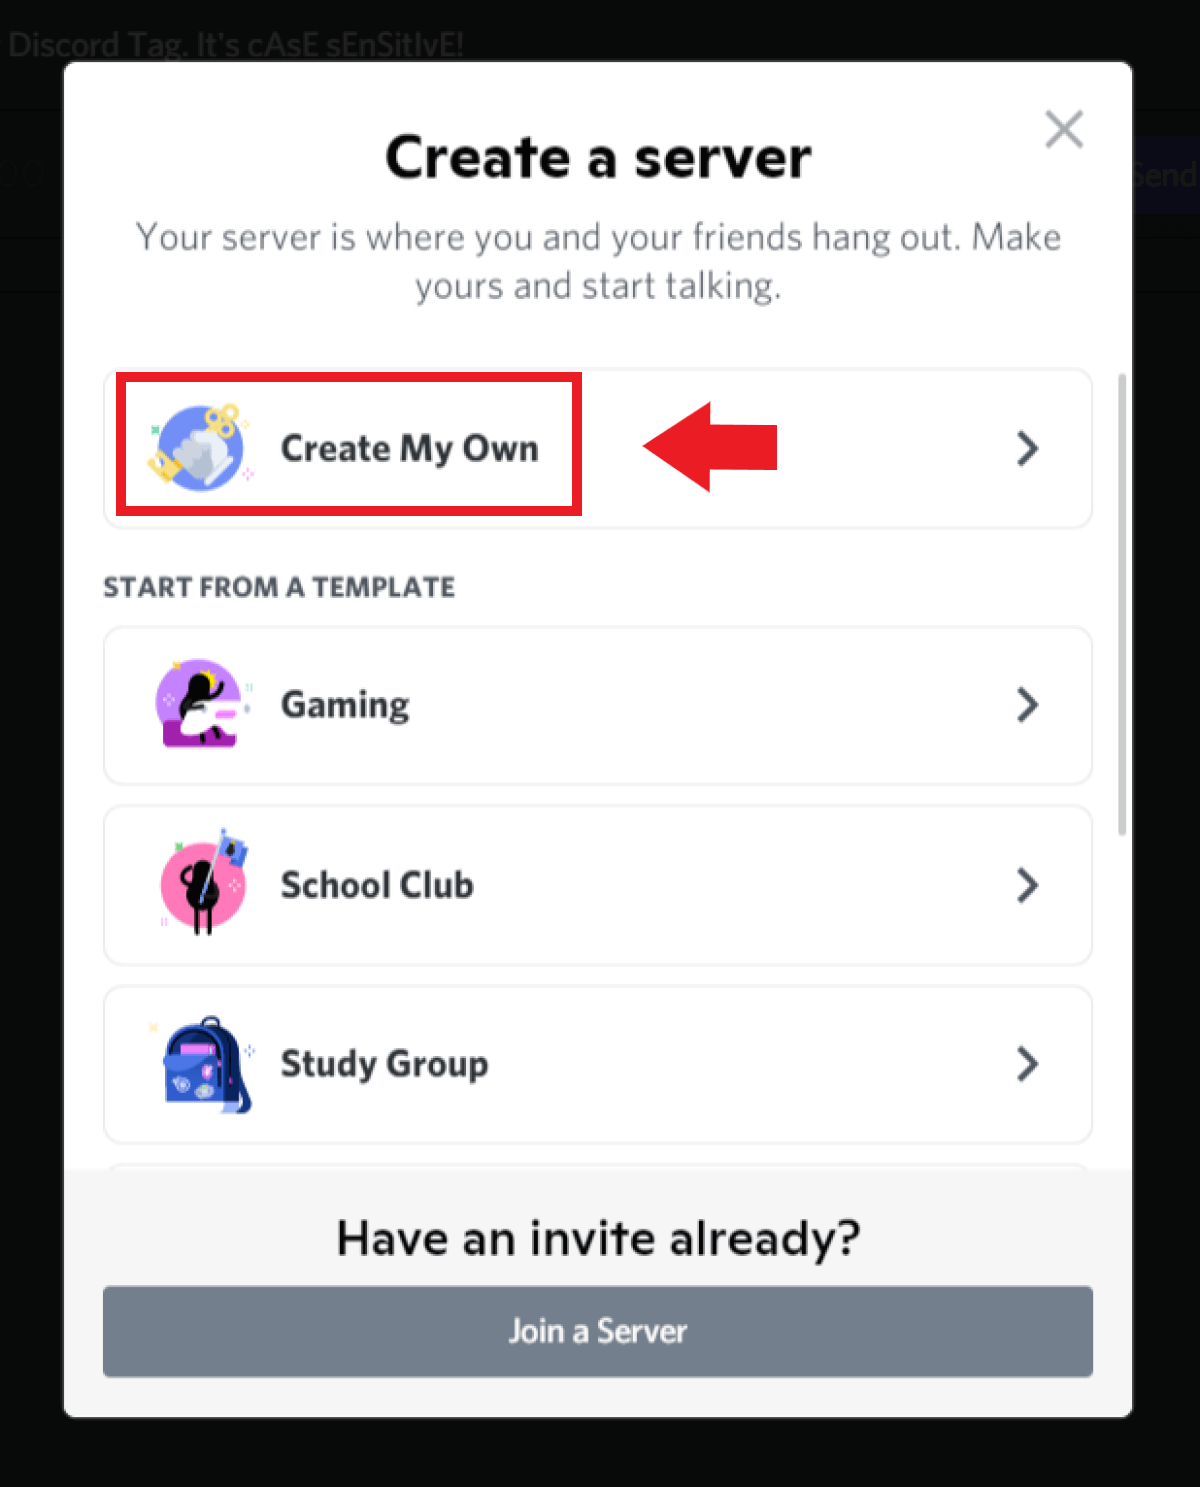 Click on “Create a server” in the window that opens